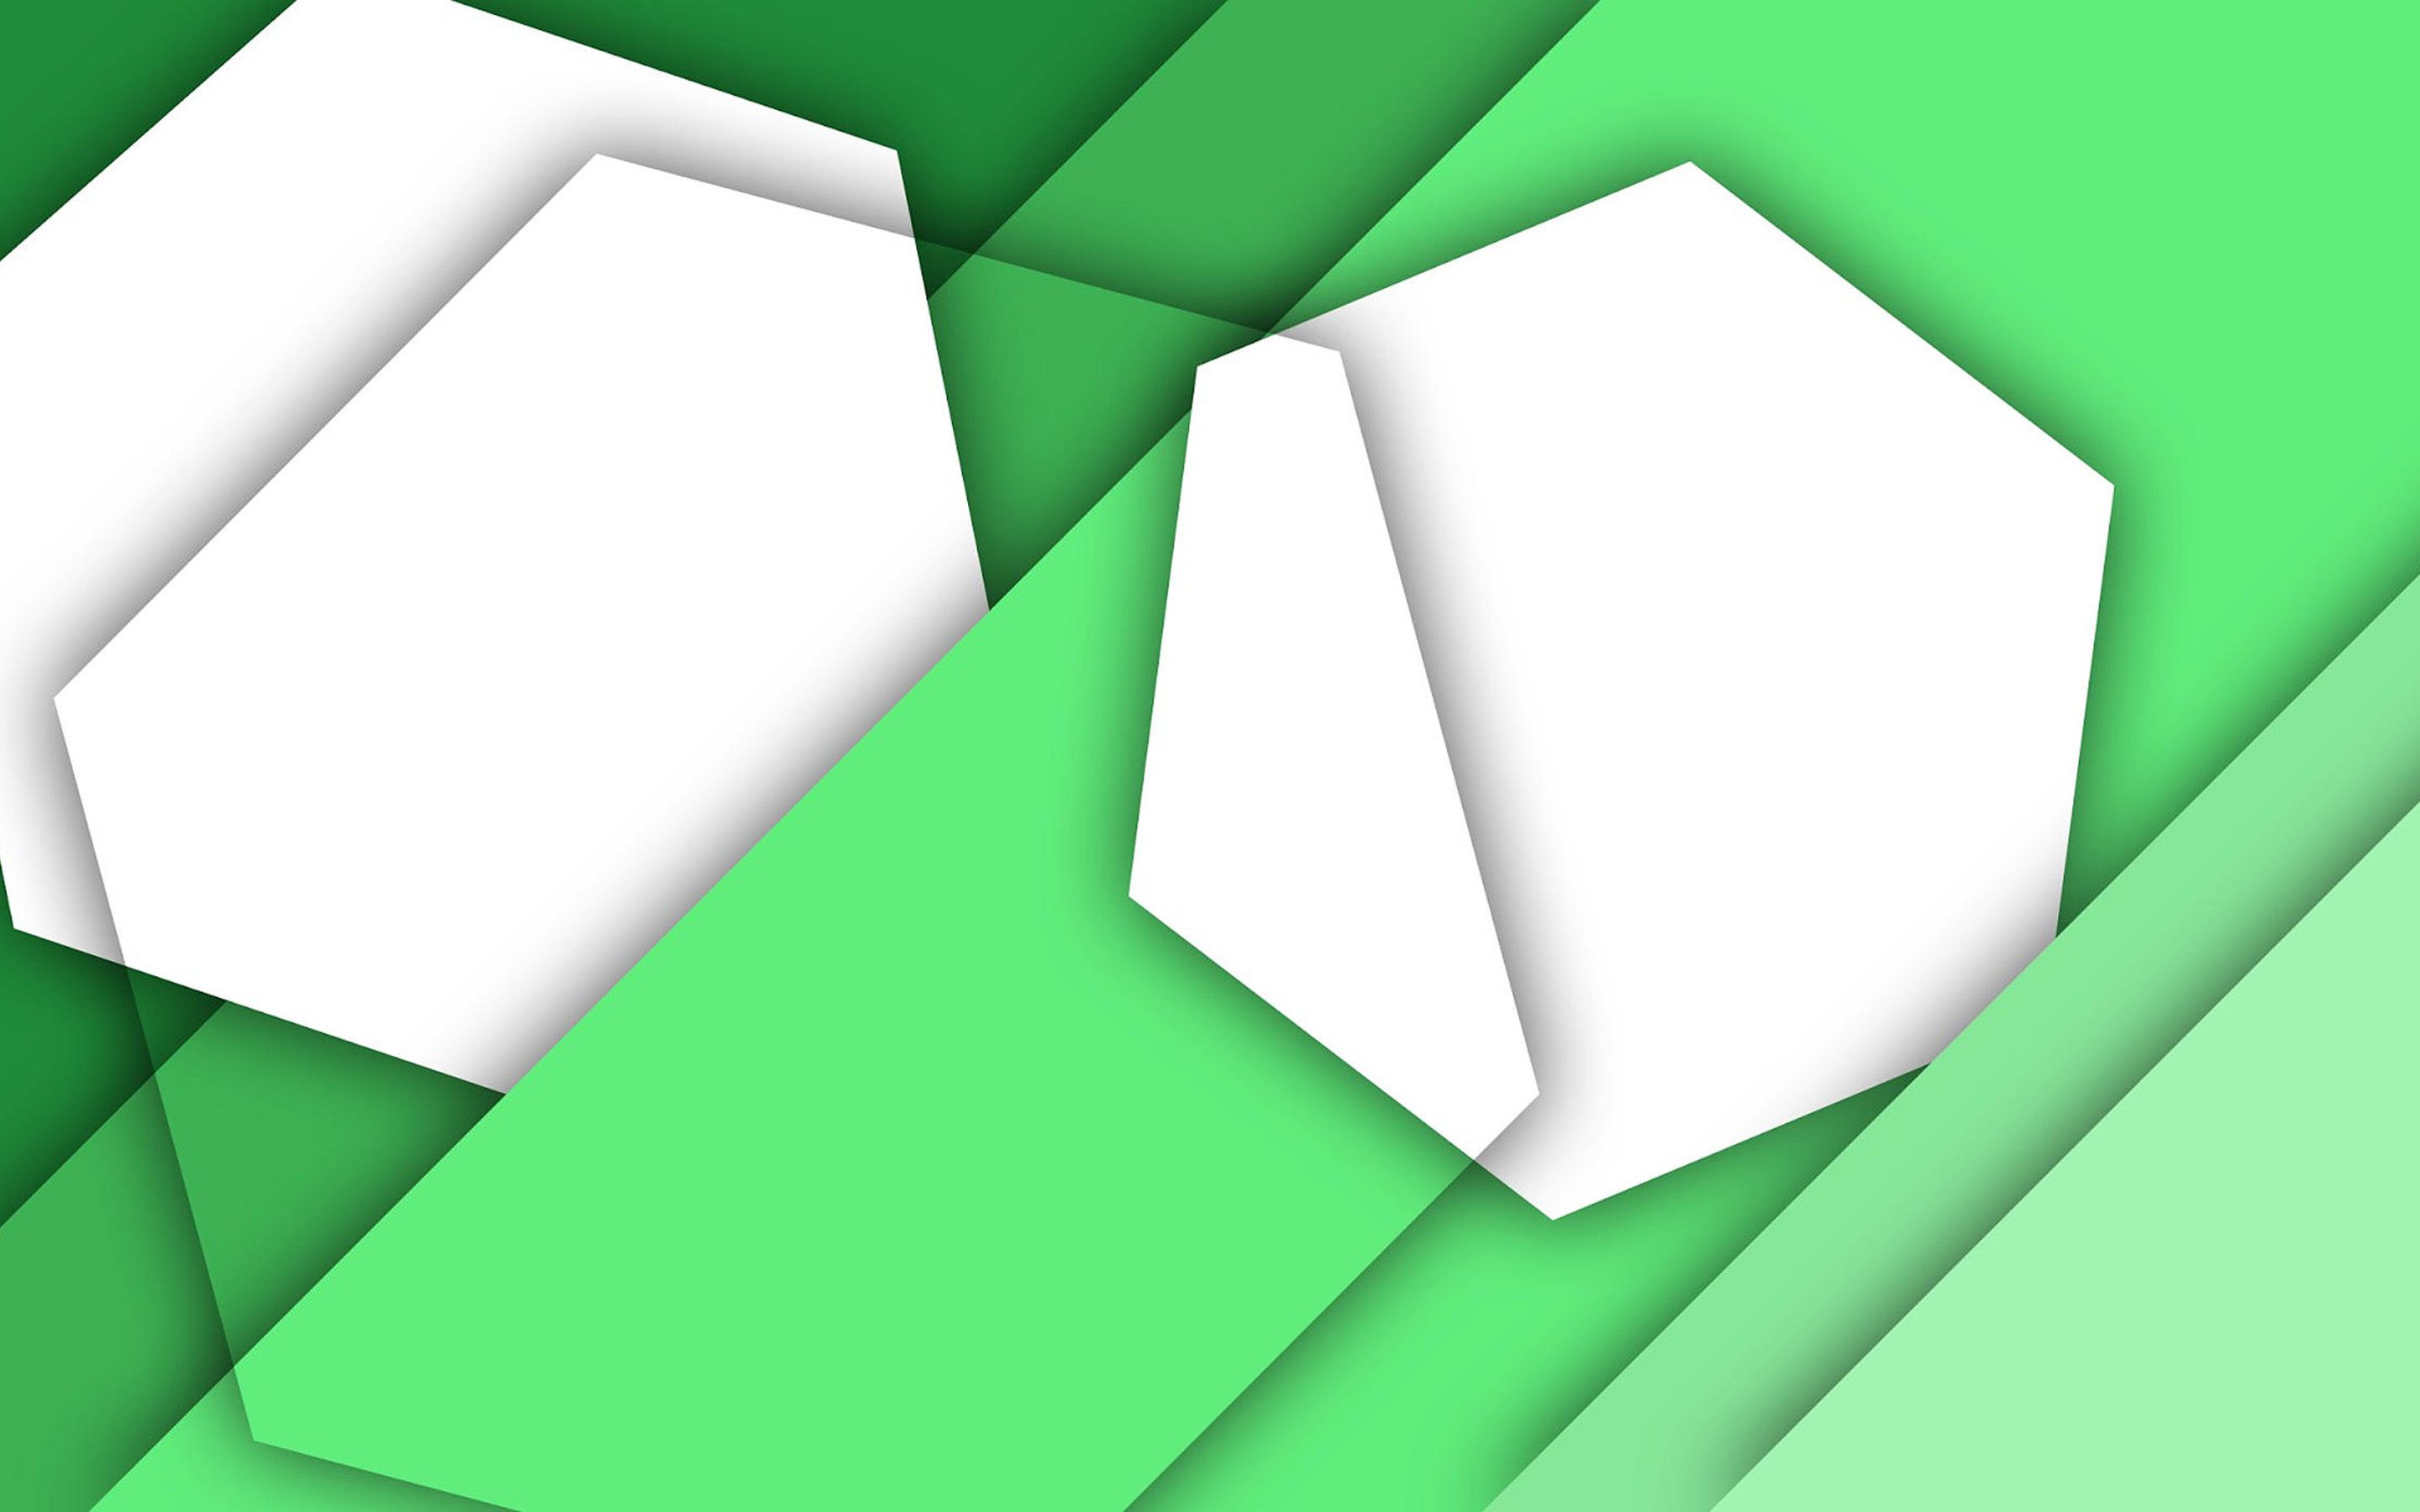 Download wallpaper material design, green and white, geometric